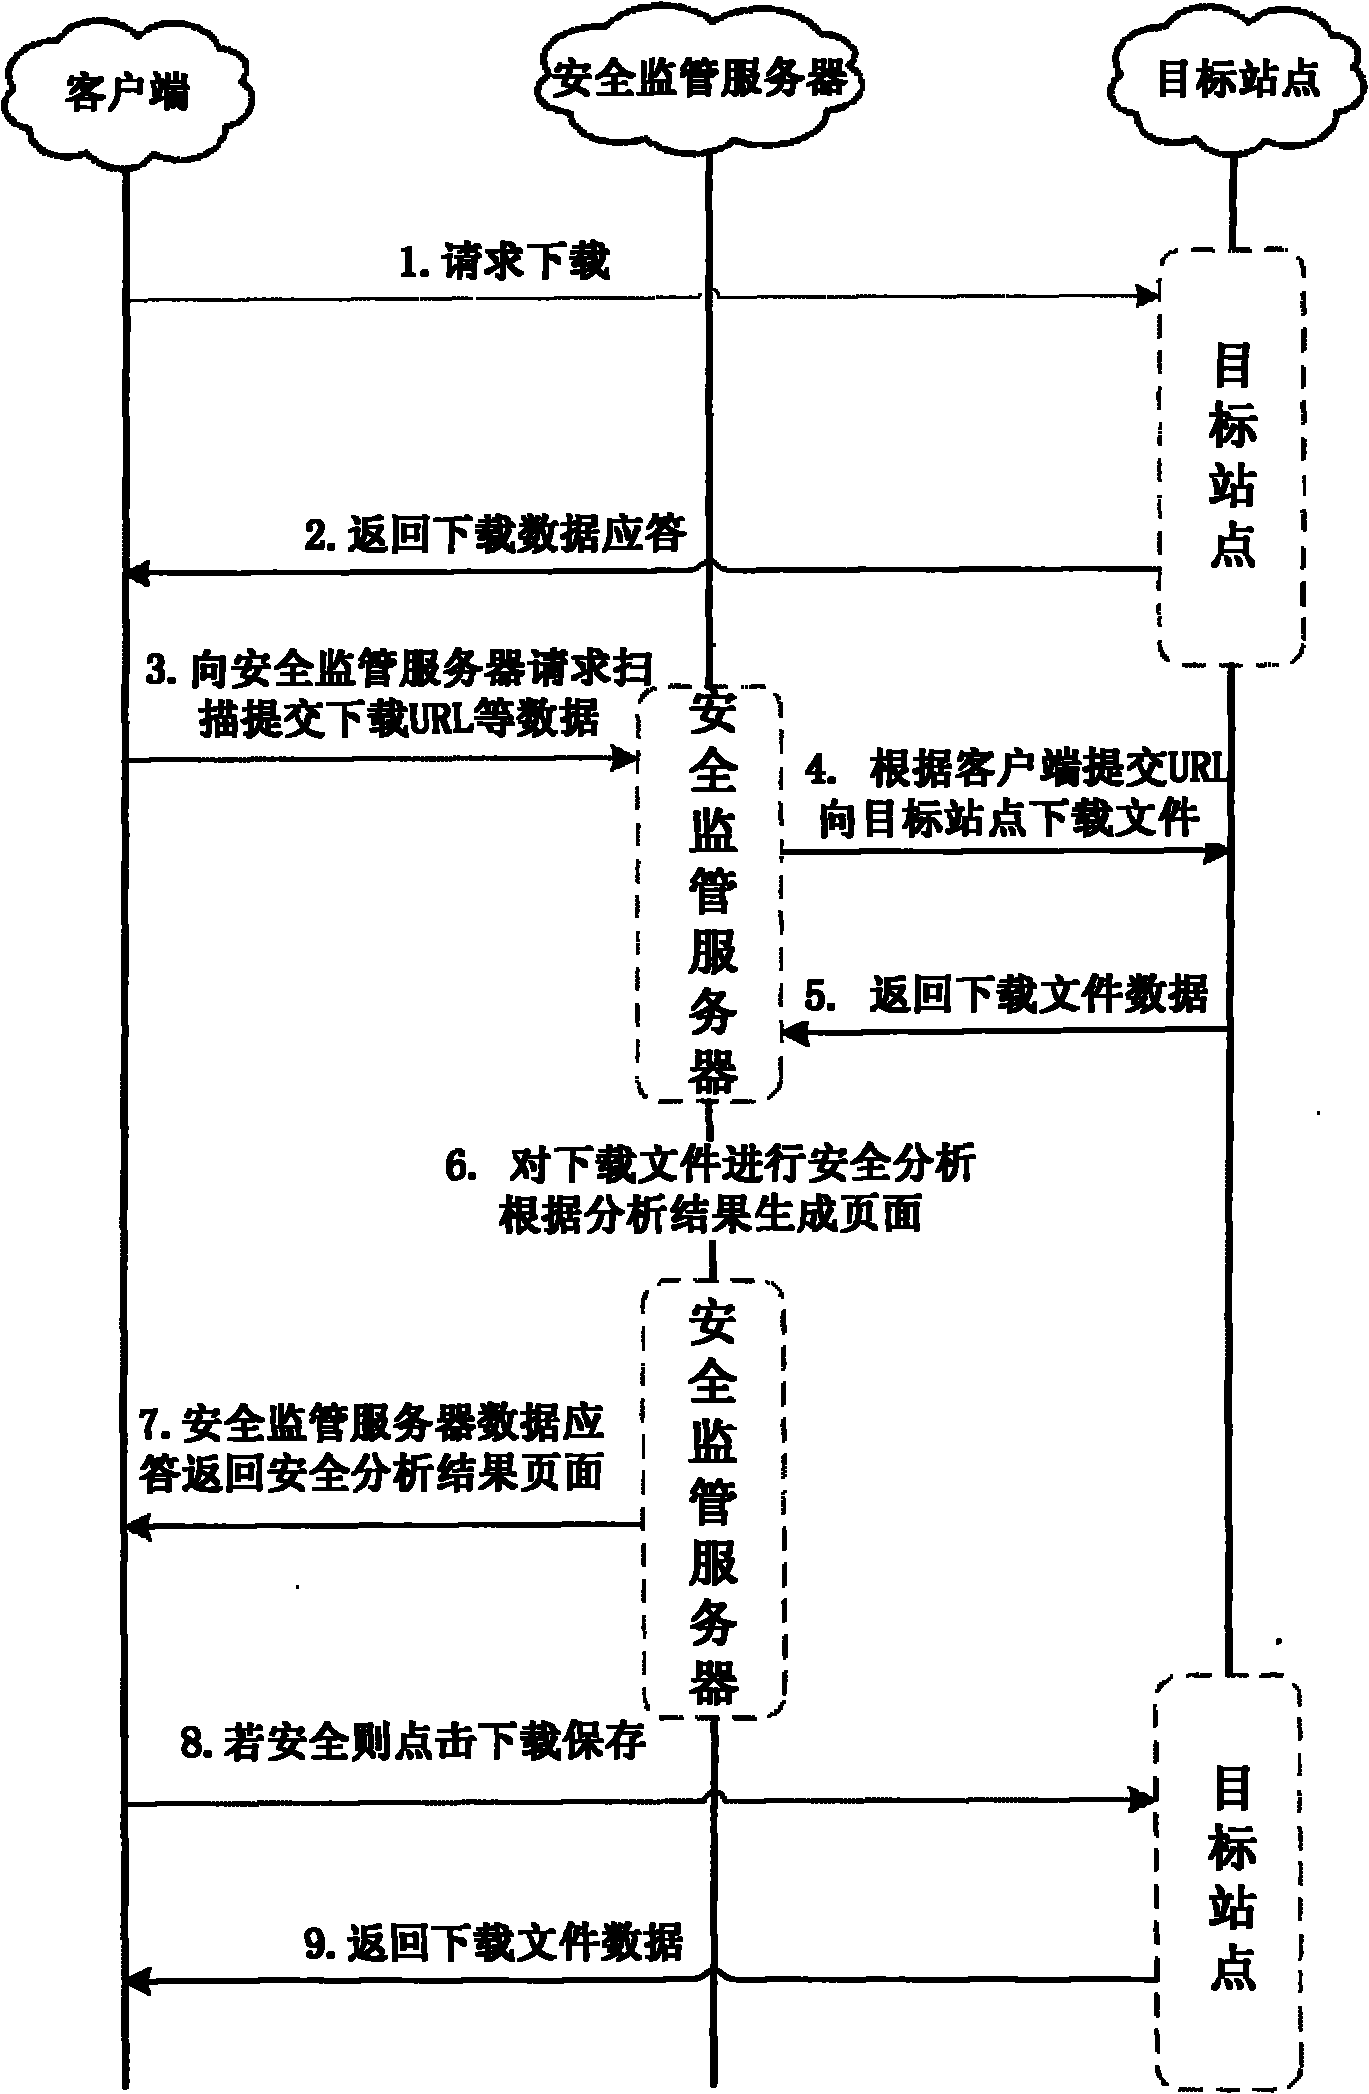 Method and system for downloading executable file securely